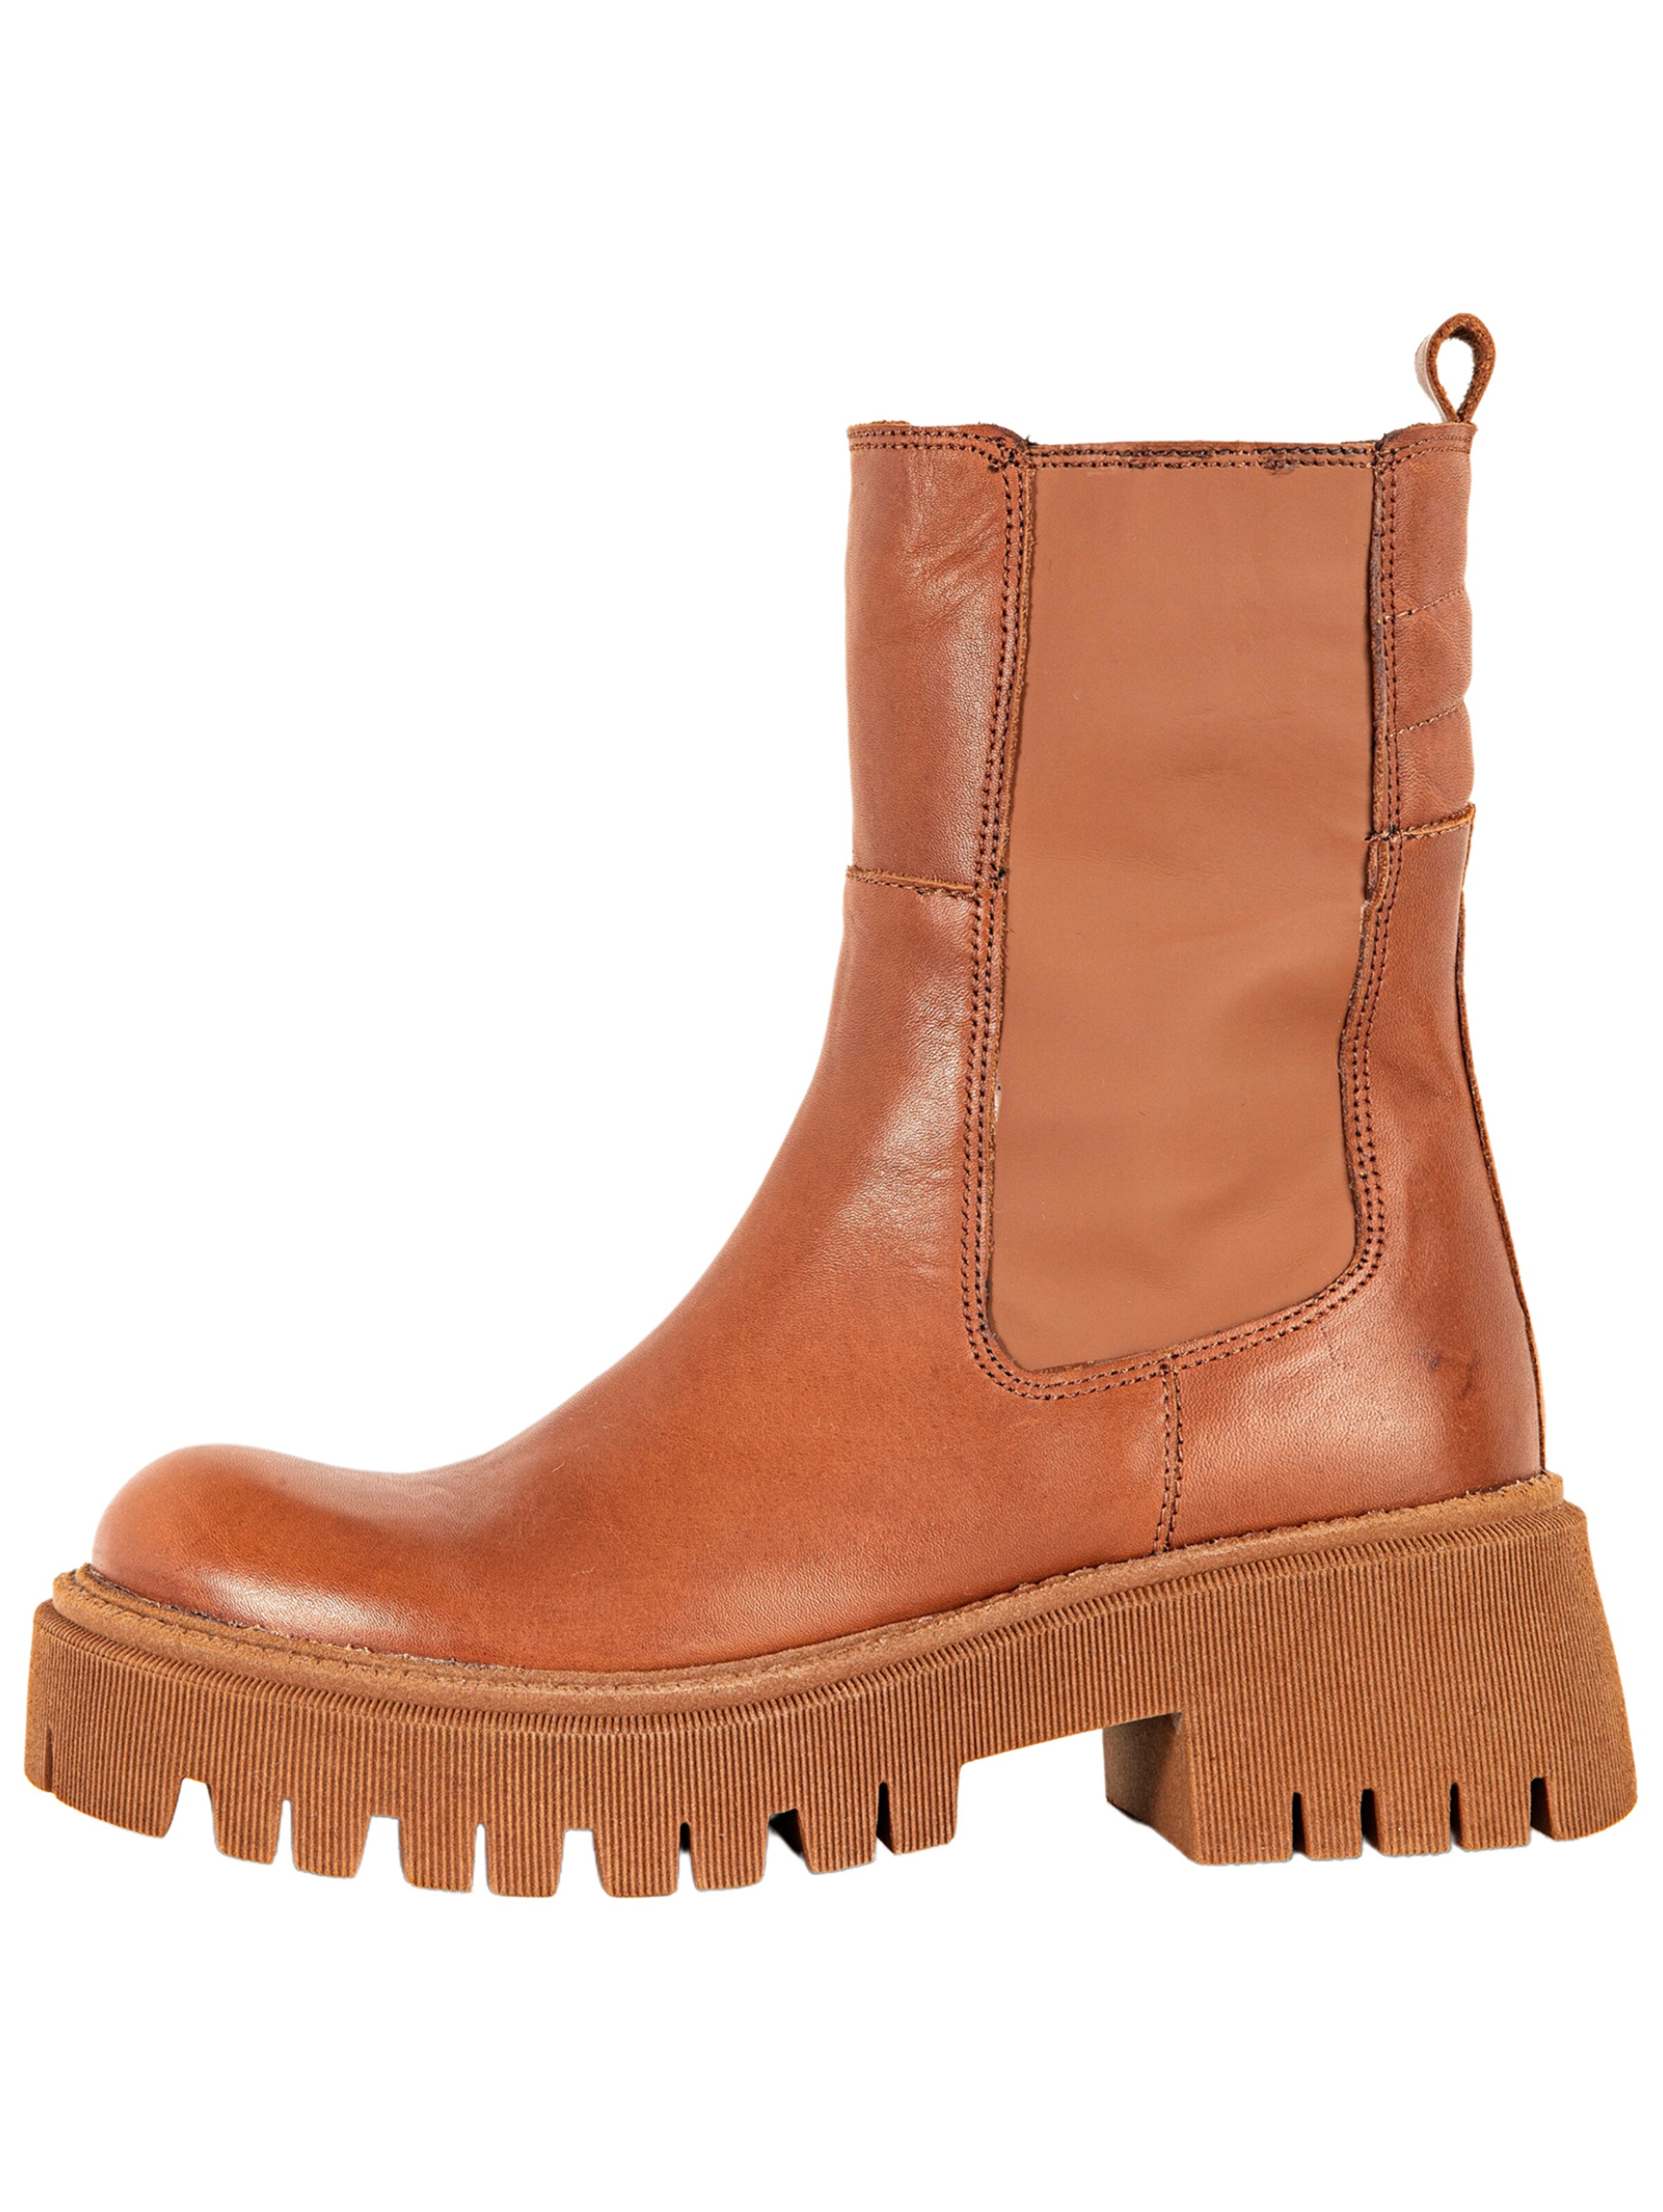 INUOVO Chelsea Boots in Cognac 